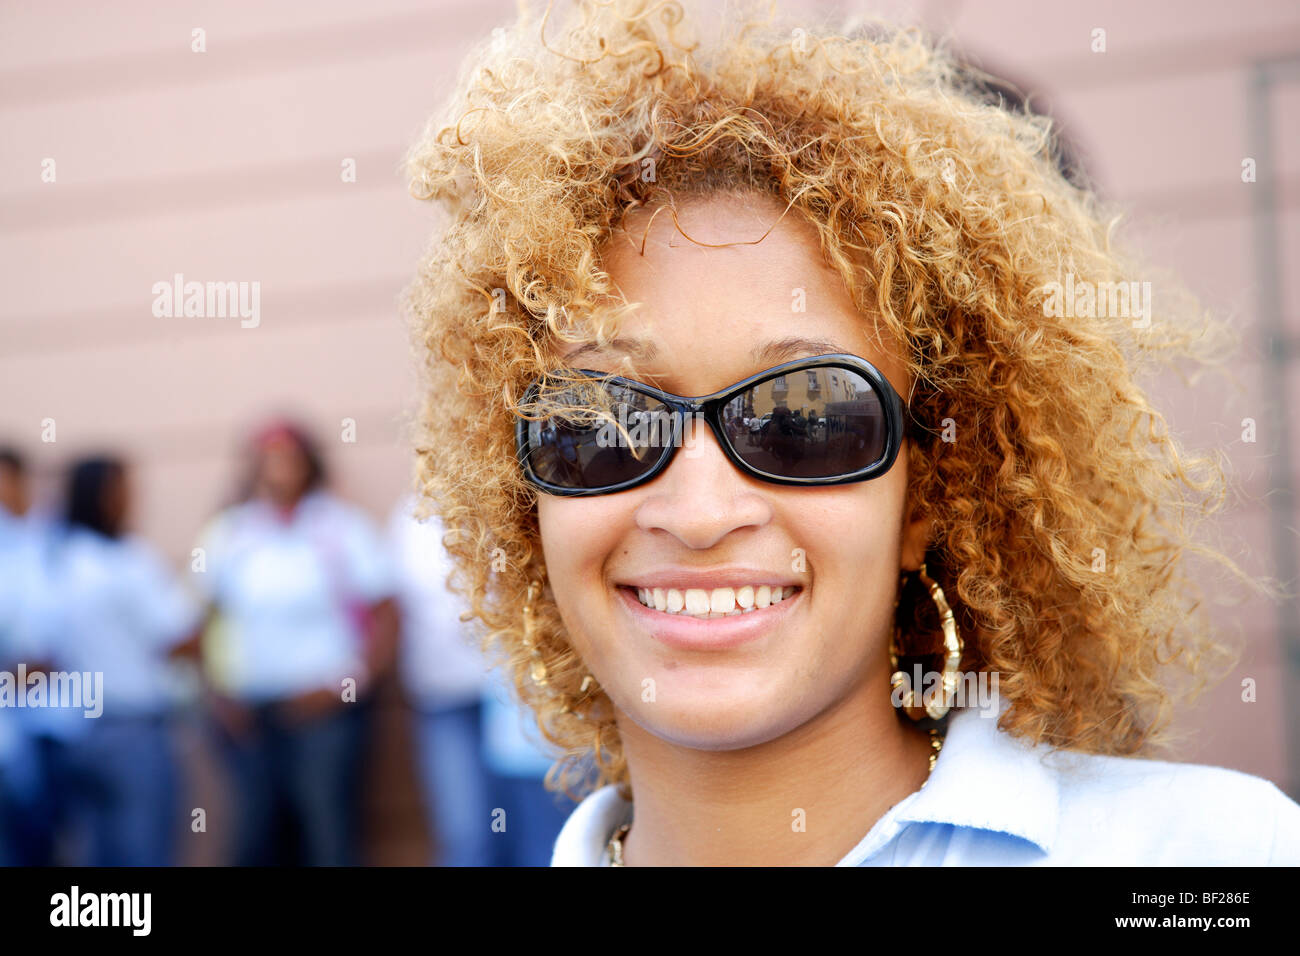 Smiling young woman wearing sunglasses, Puerto Rico, Carribean, America Stock Photo